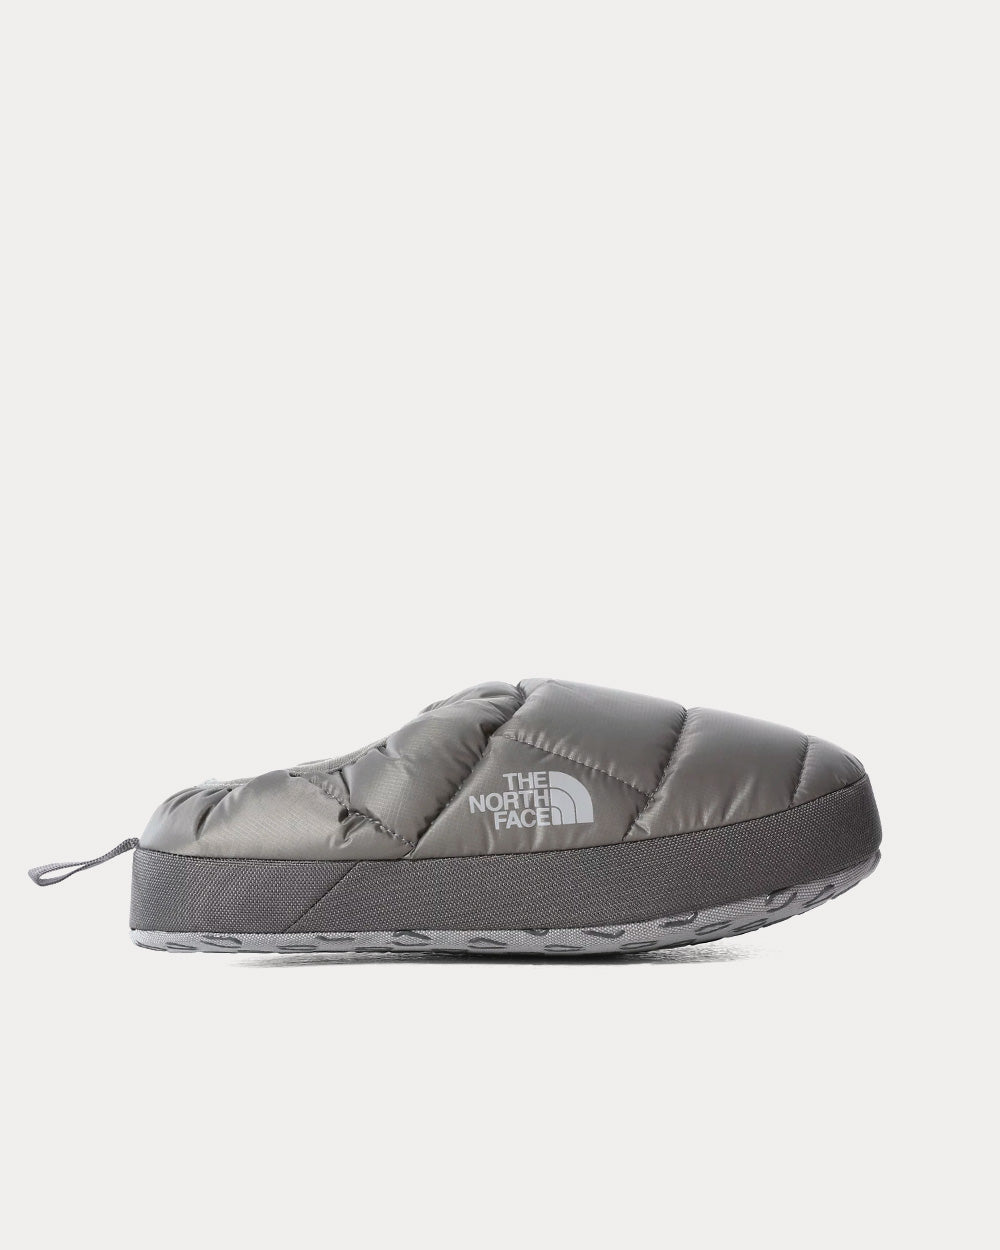 The North Face - NSE III Tent Mules Grey Slip Ons